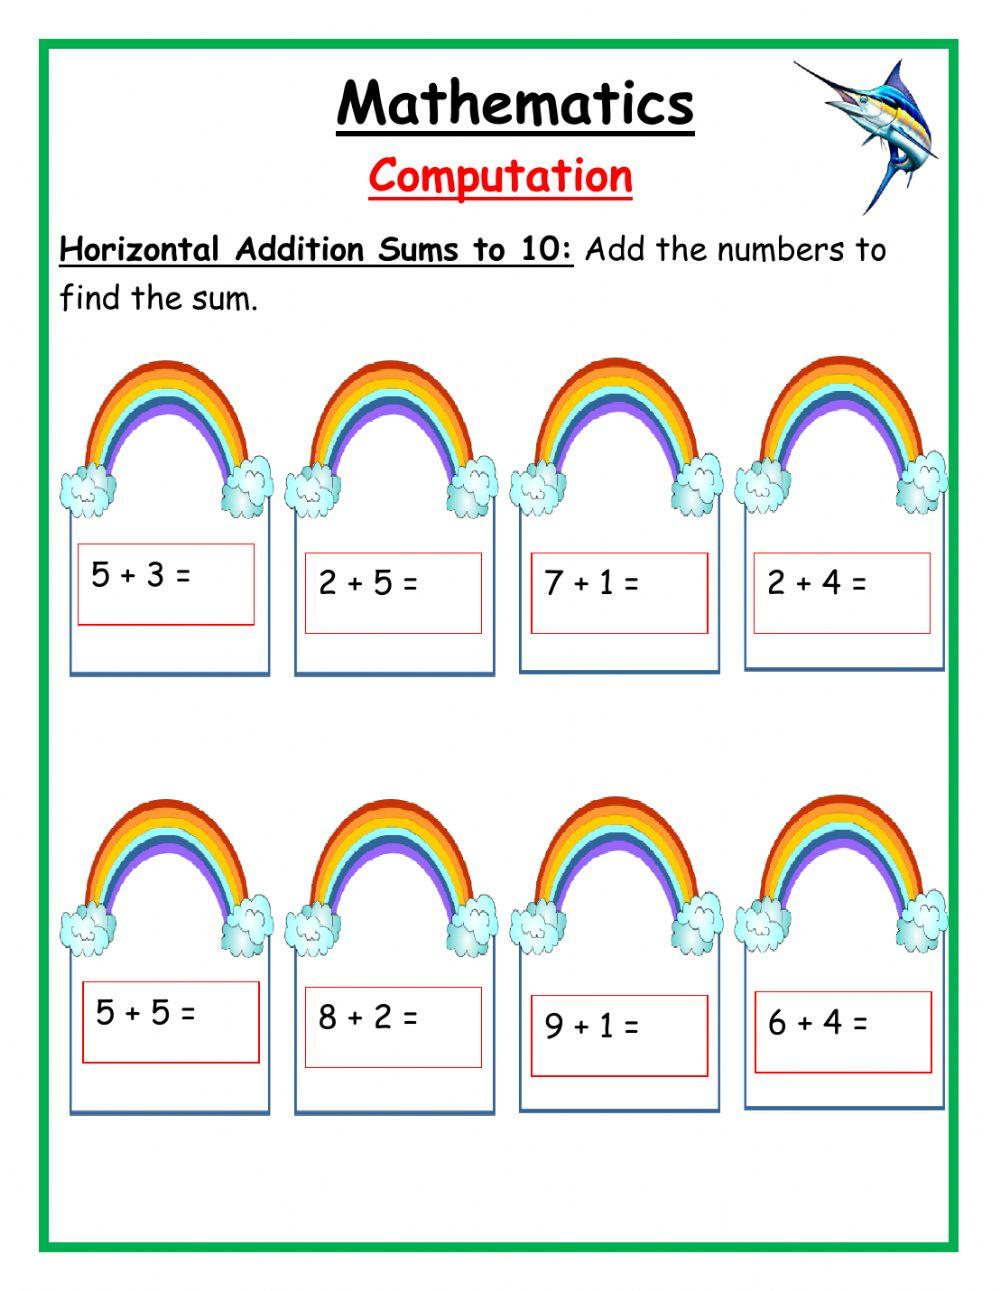 Horizontal addition sums to 10